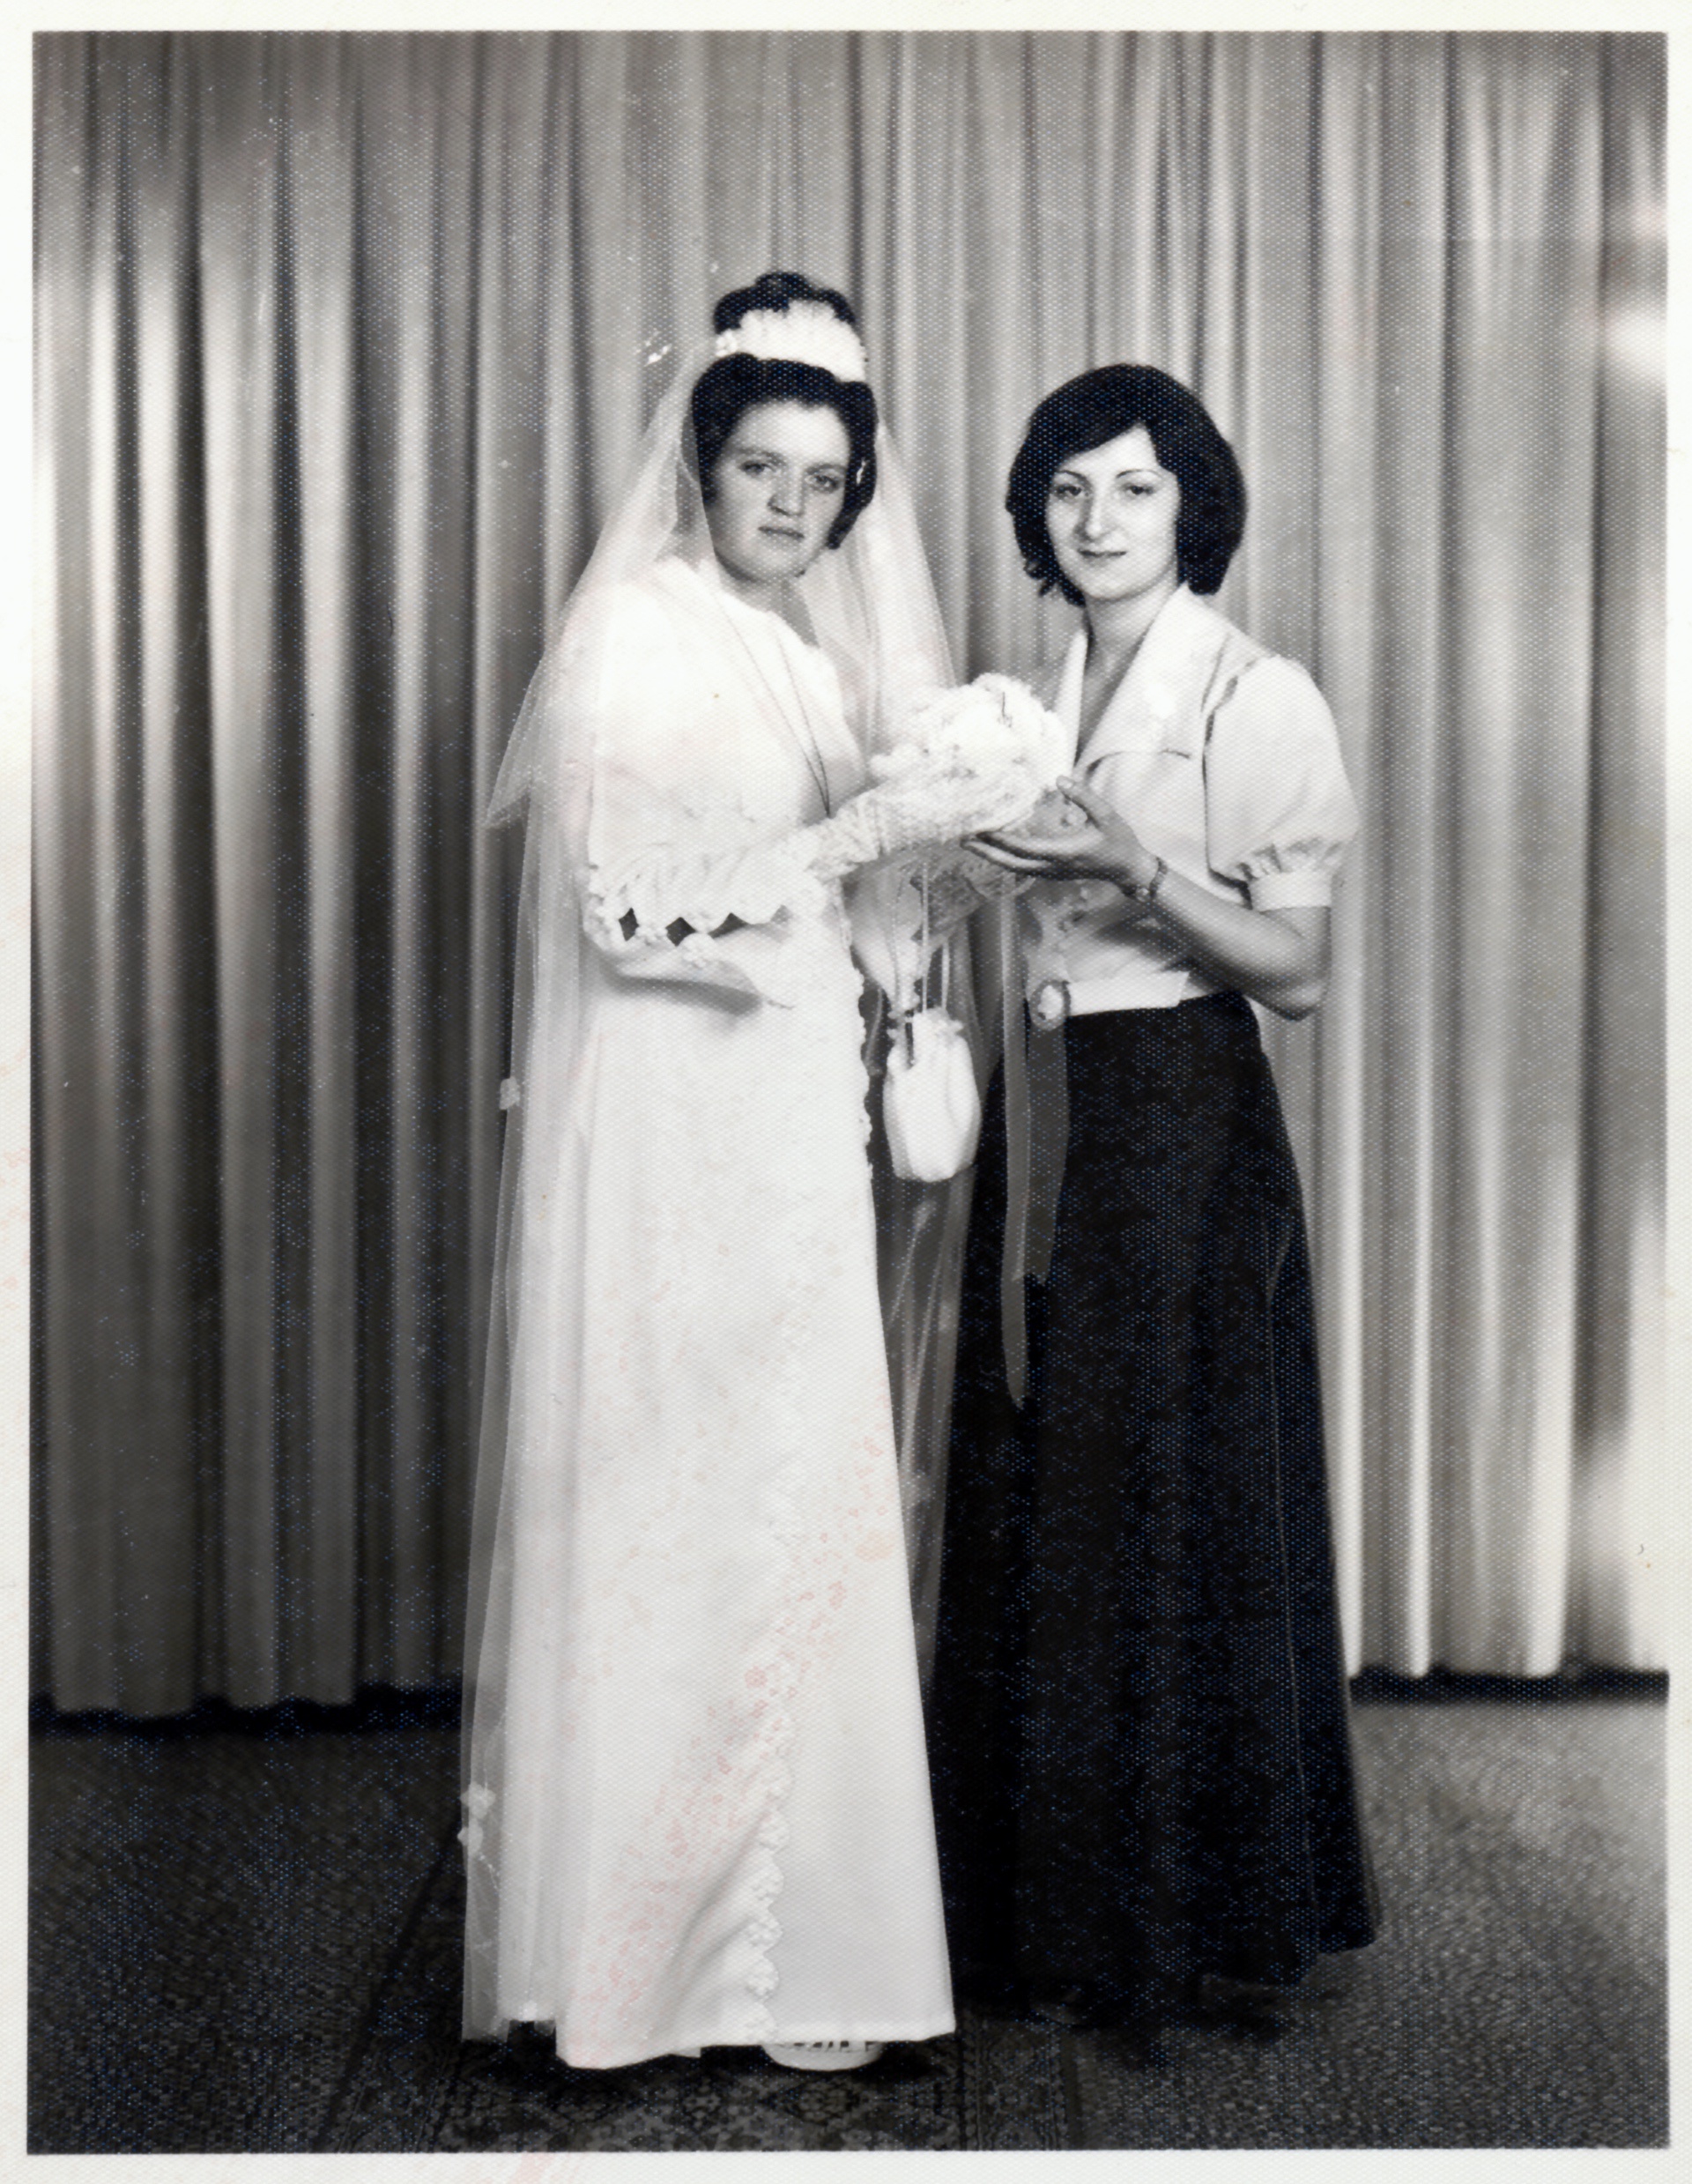 1960s bride with a friend